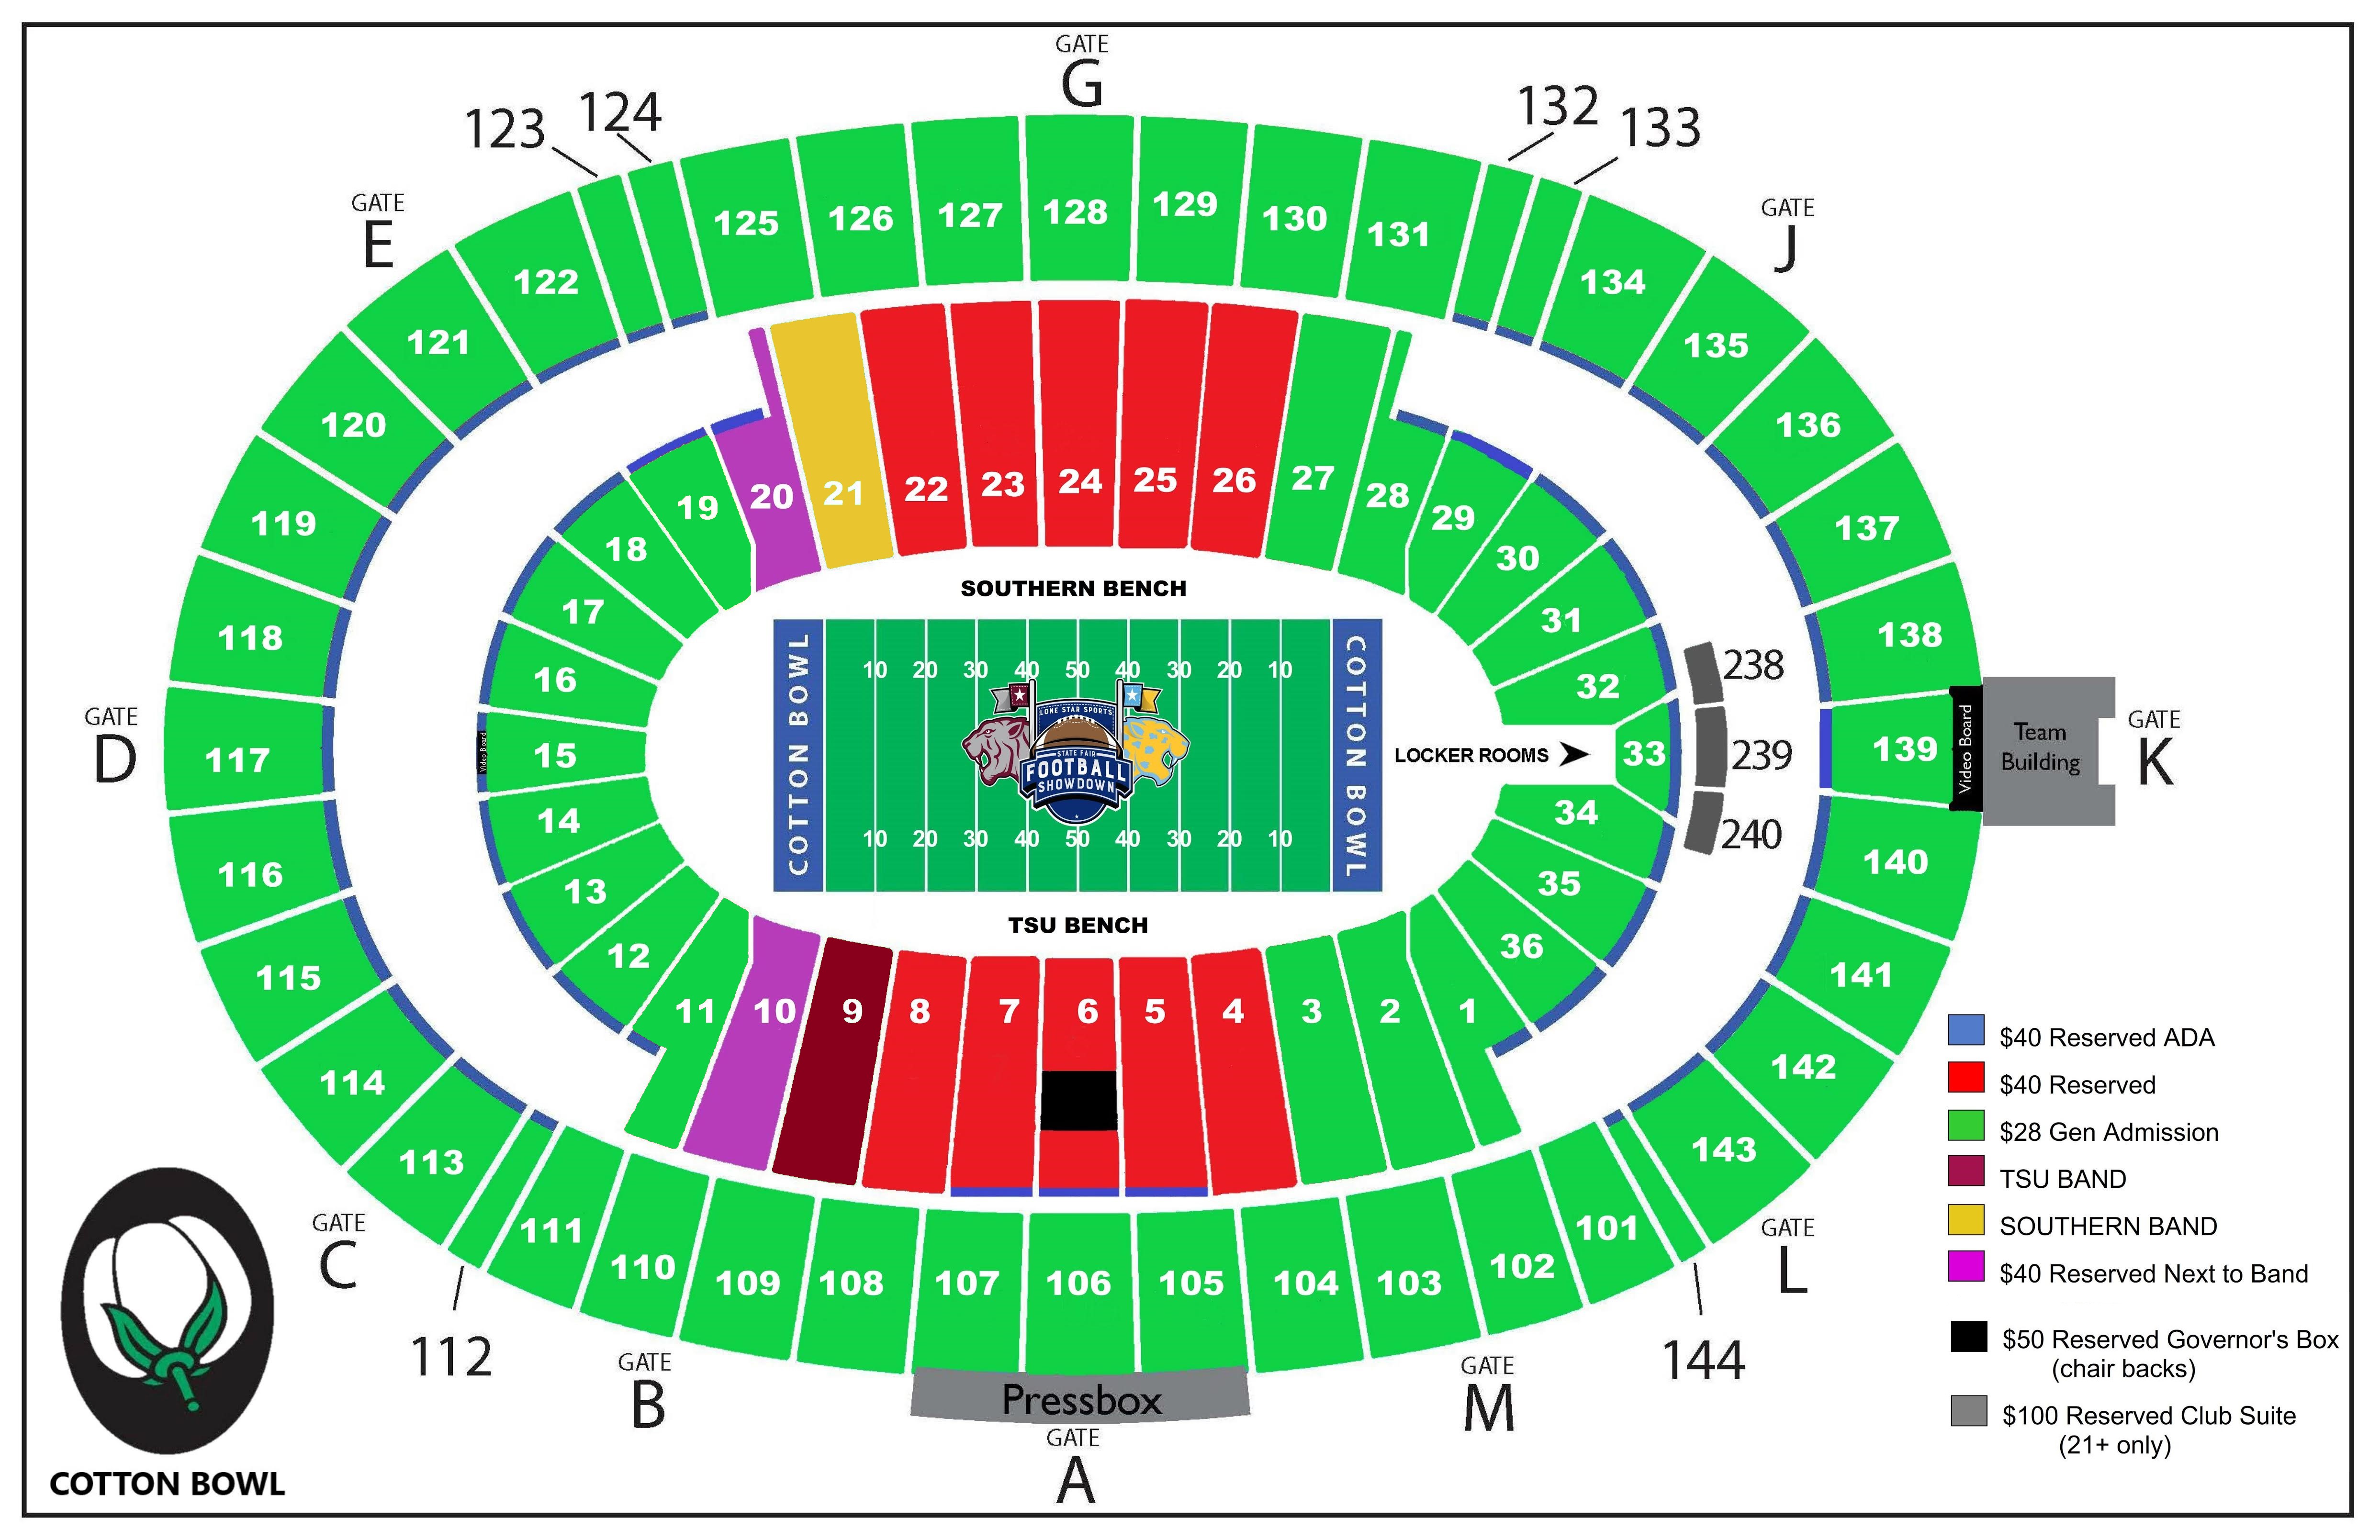 Cotton Bowl Stadium Seating Chart / We expend a lot of effort